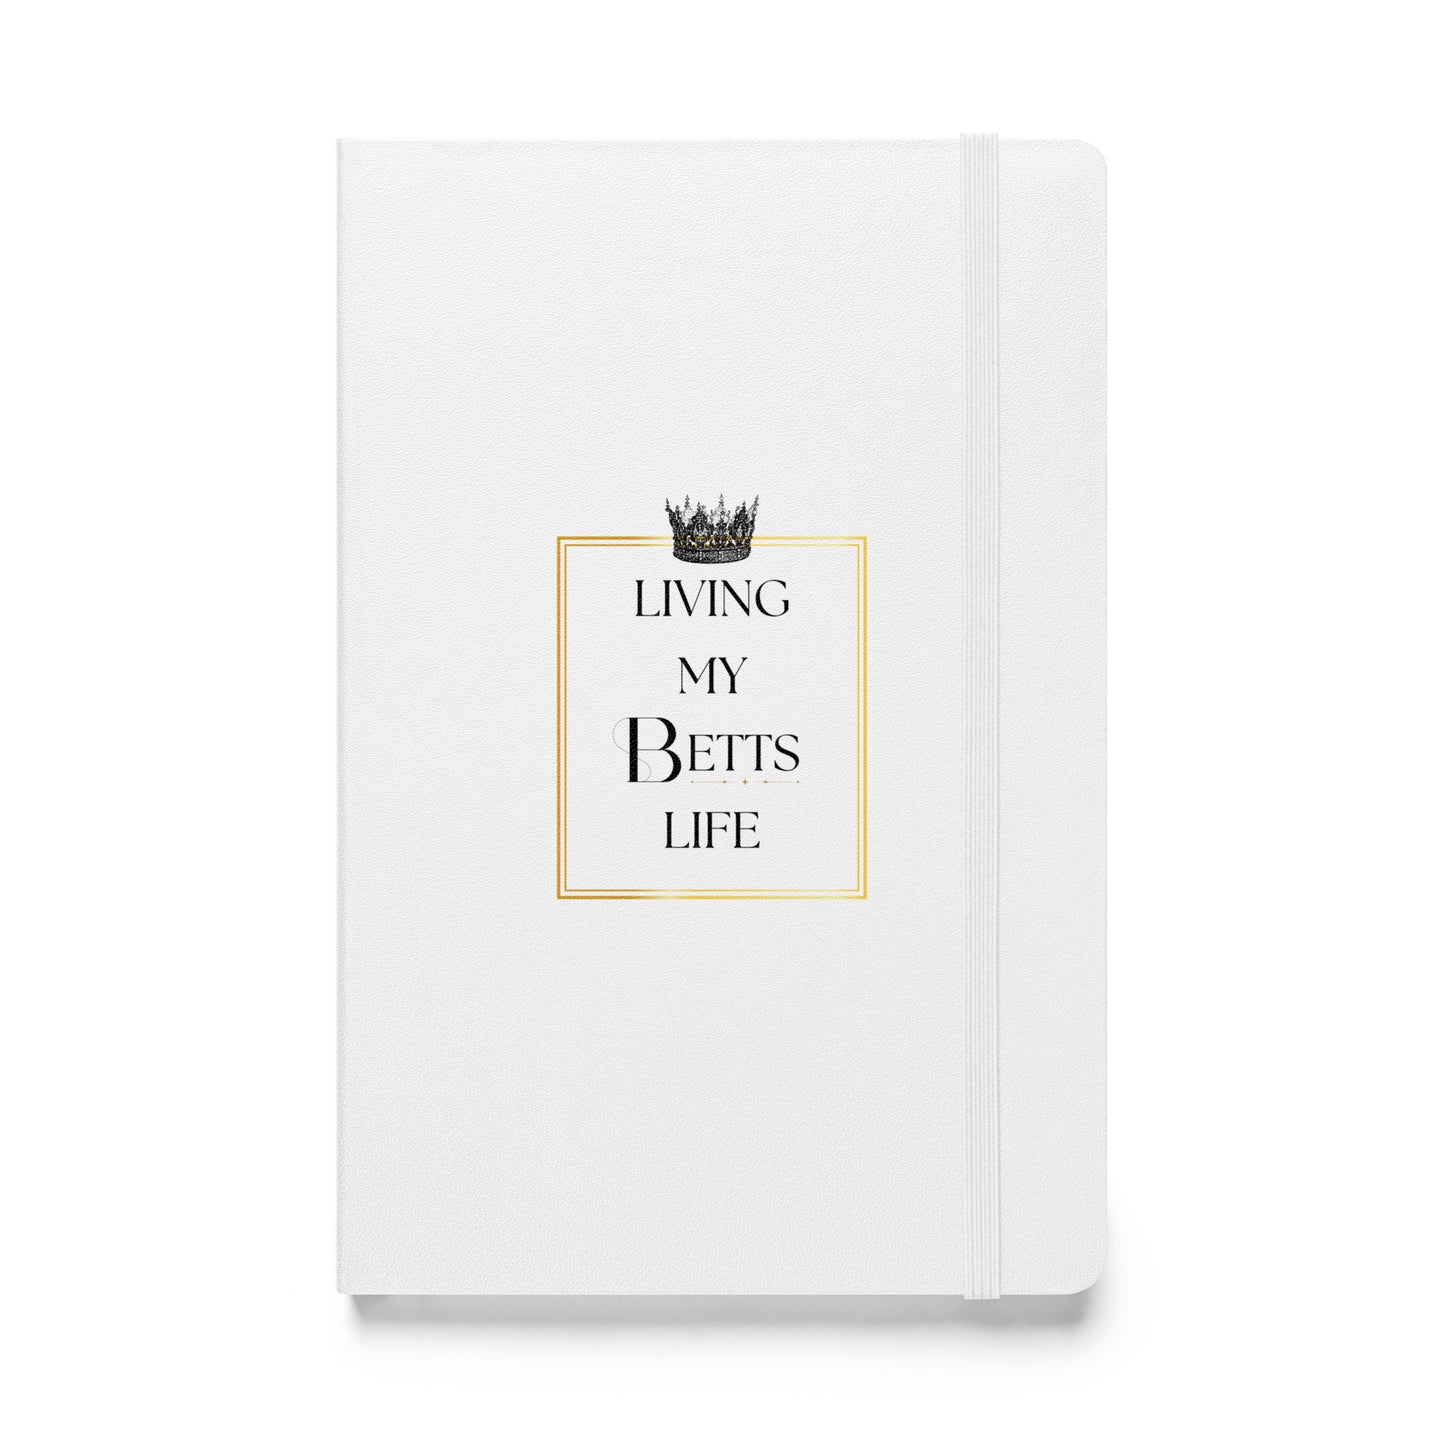 Living My Betts Life Hardcover Notebook